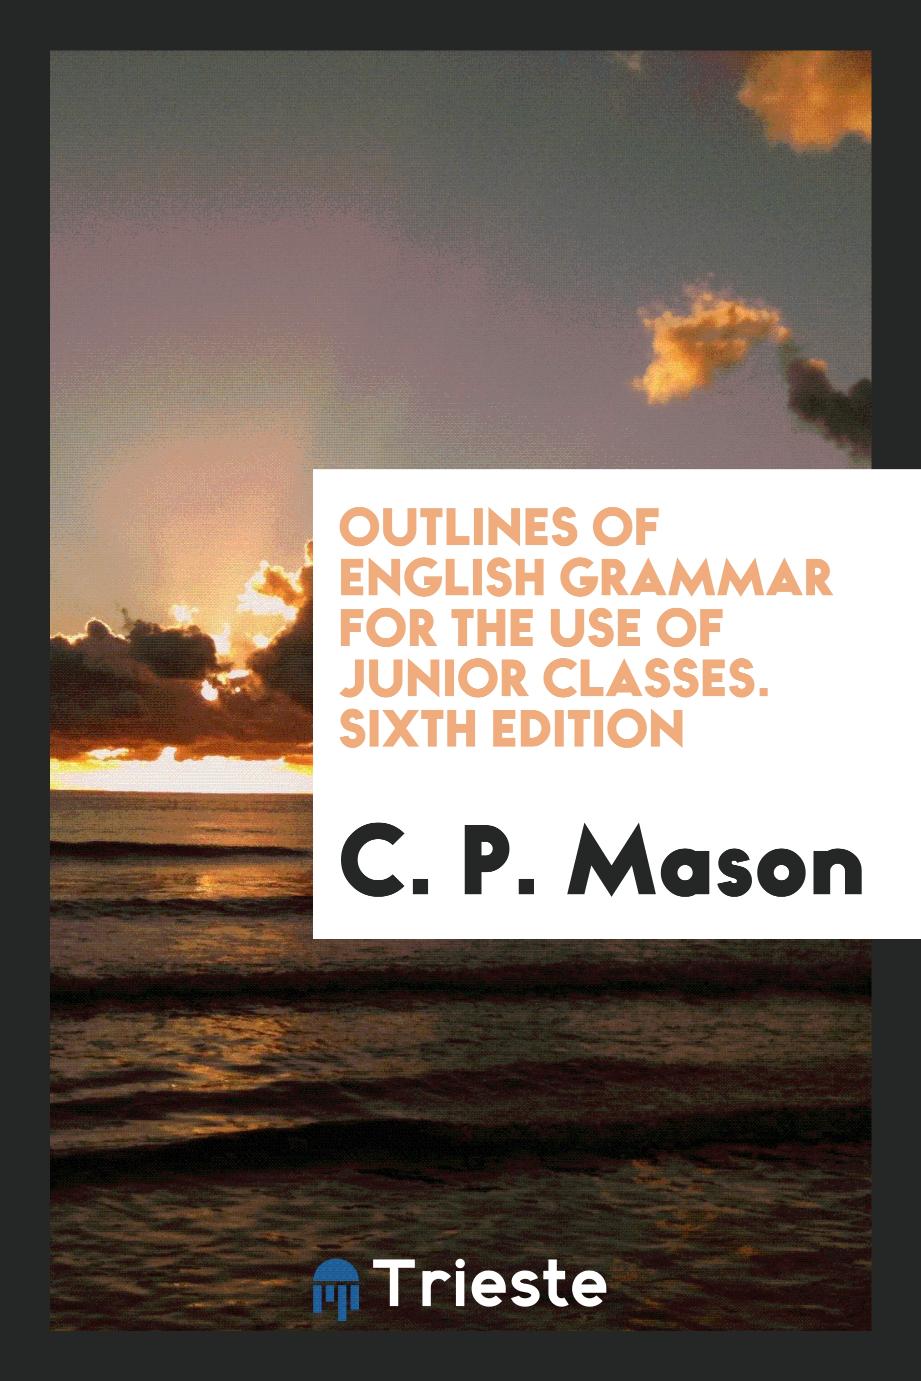 Outlines of English Grammar for the Use of Junior Classes. Sixth Edition